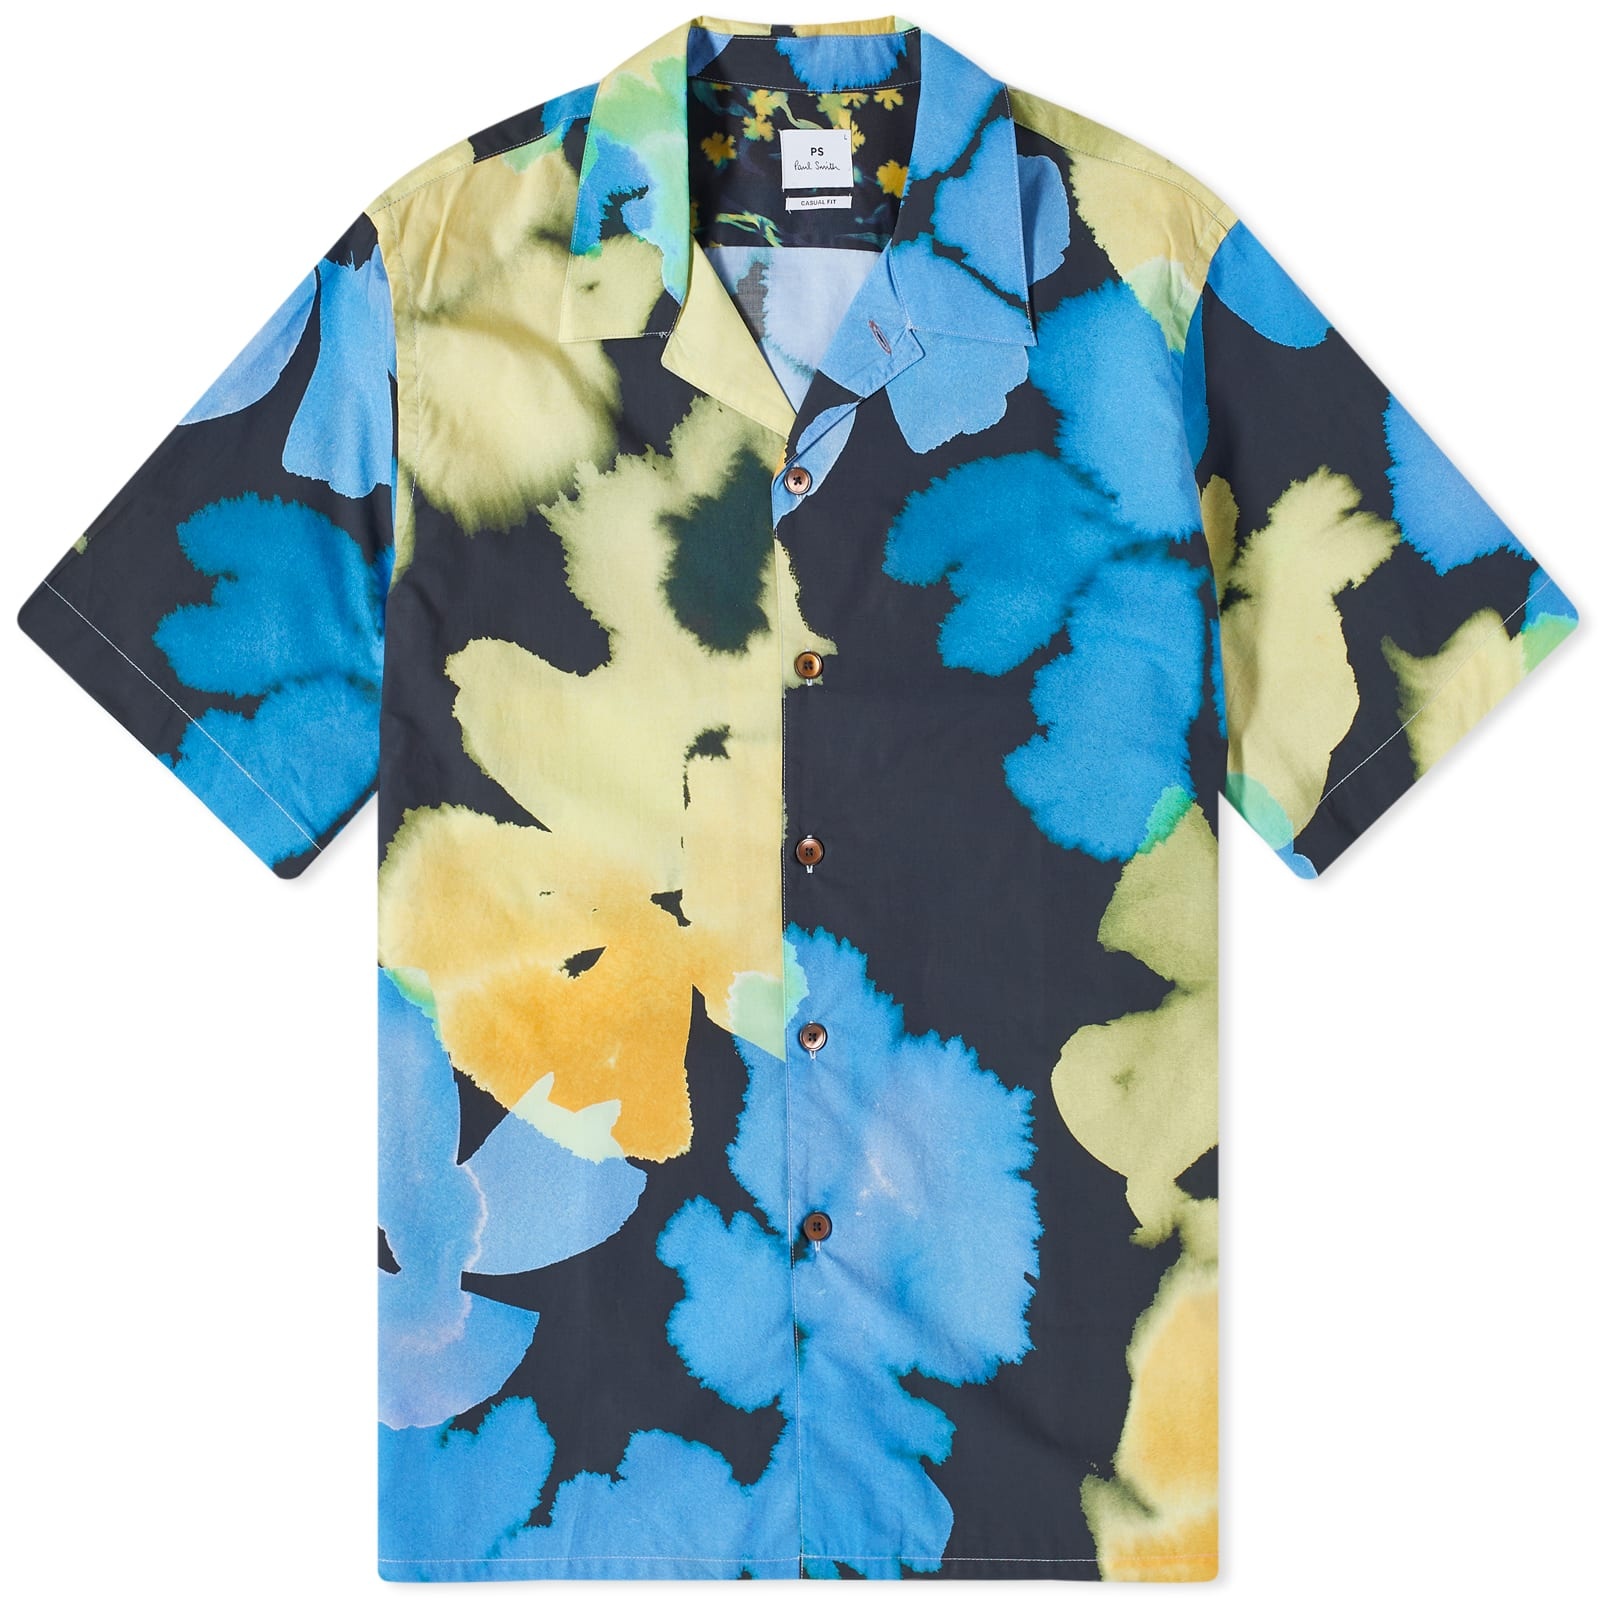 Paul Smith Floral Vacation Shirt - 1